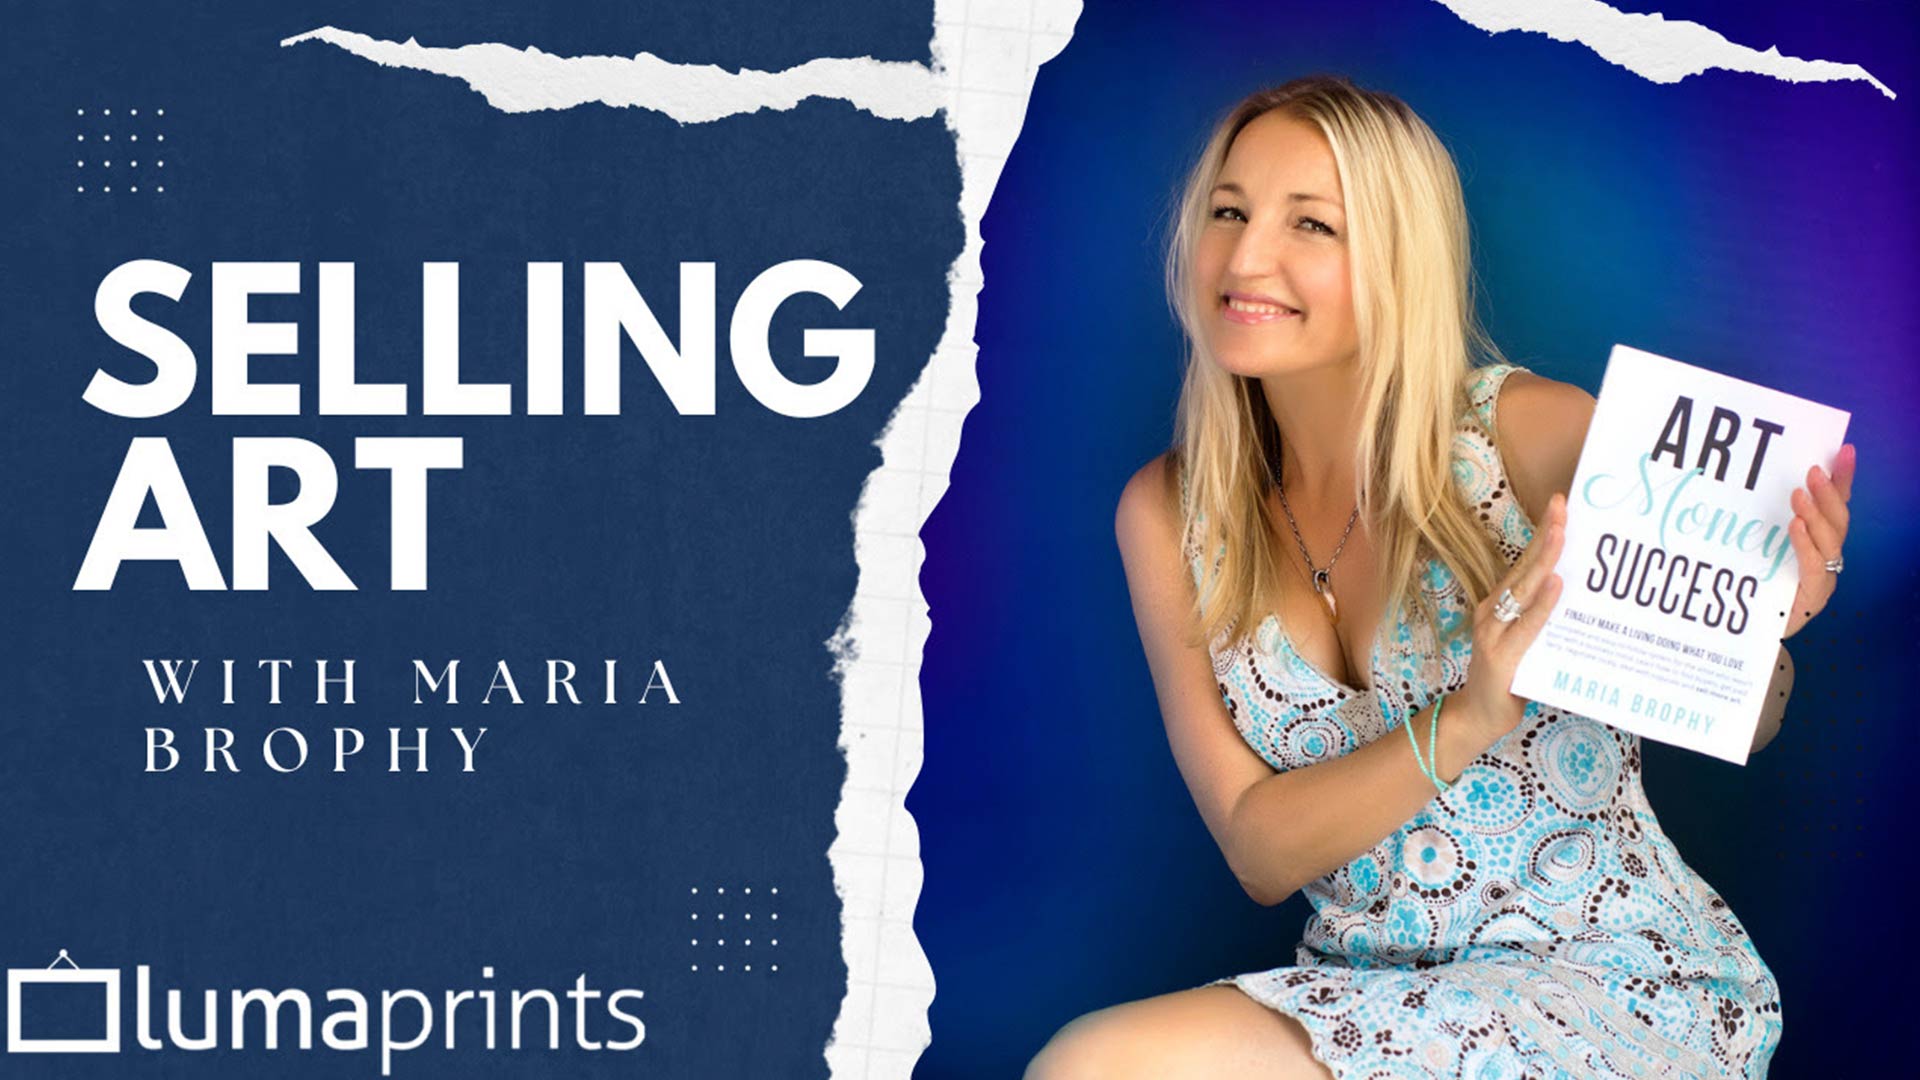 [WEBINAR] How to Successfully Sell Art with Maria Brophy